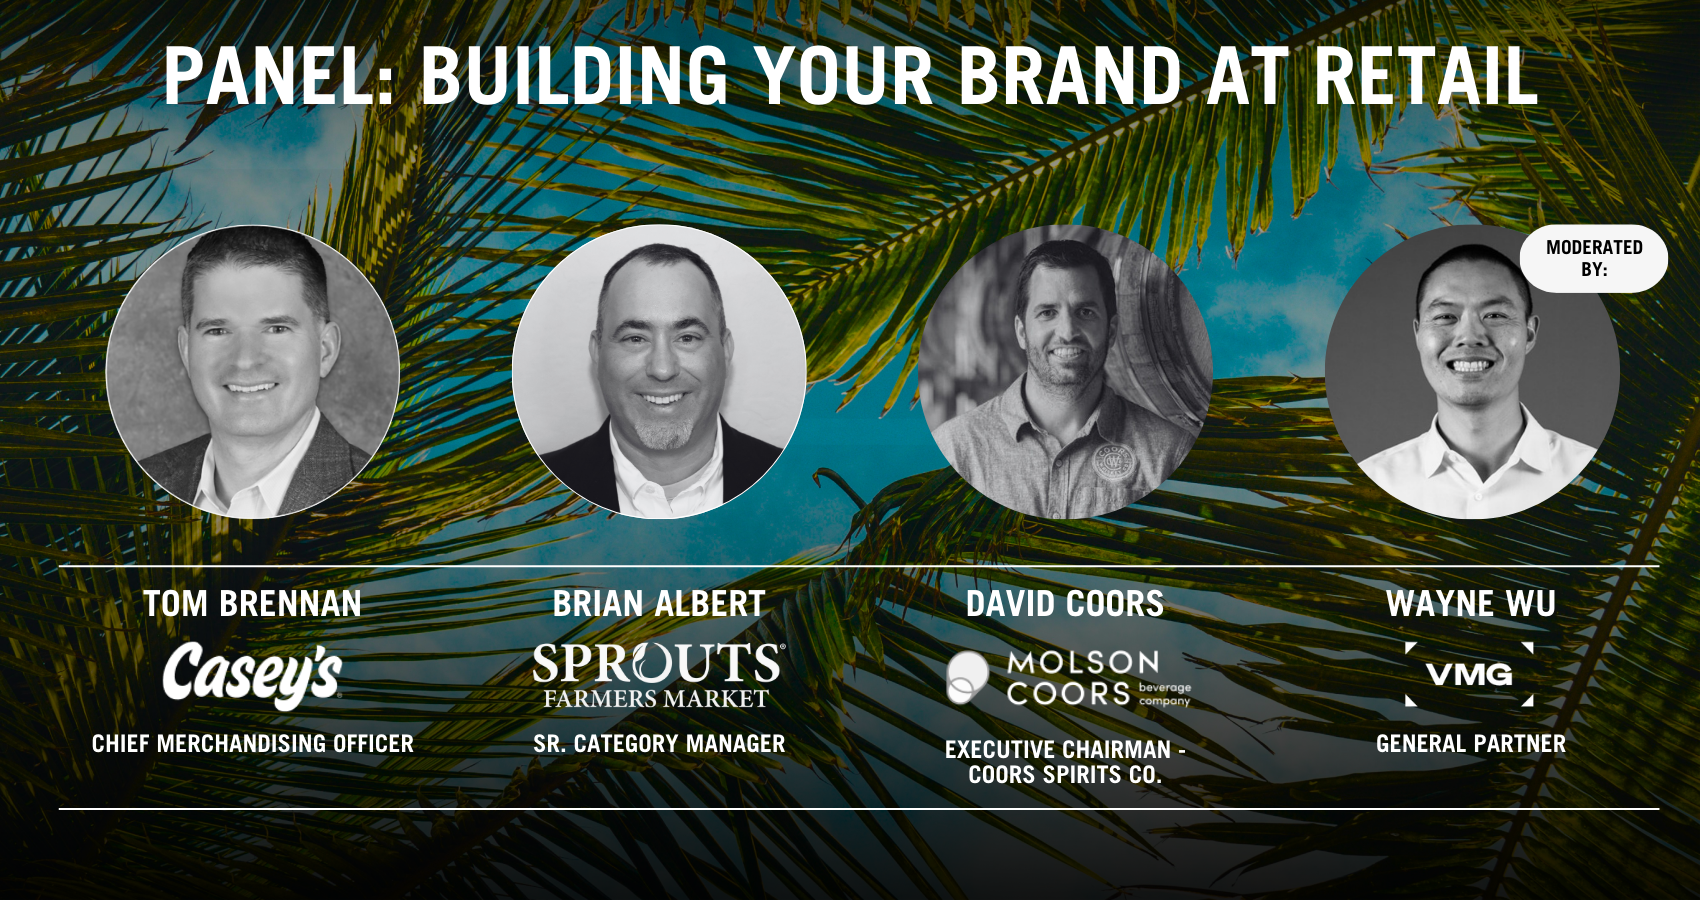 Panel: Building Your Brand at Retail